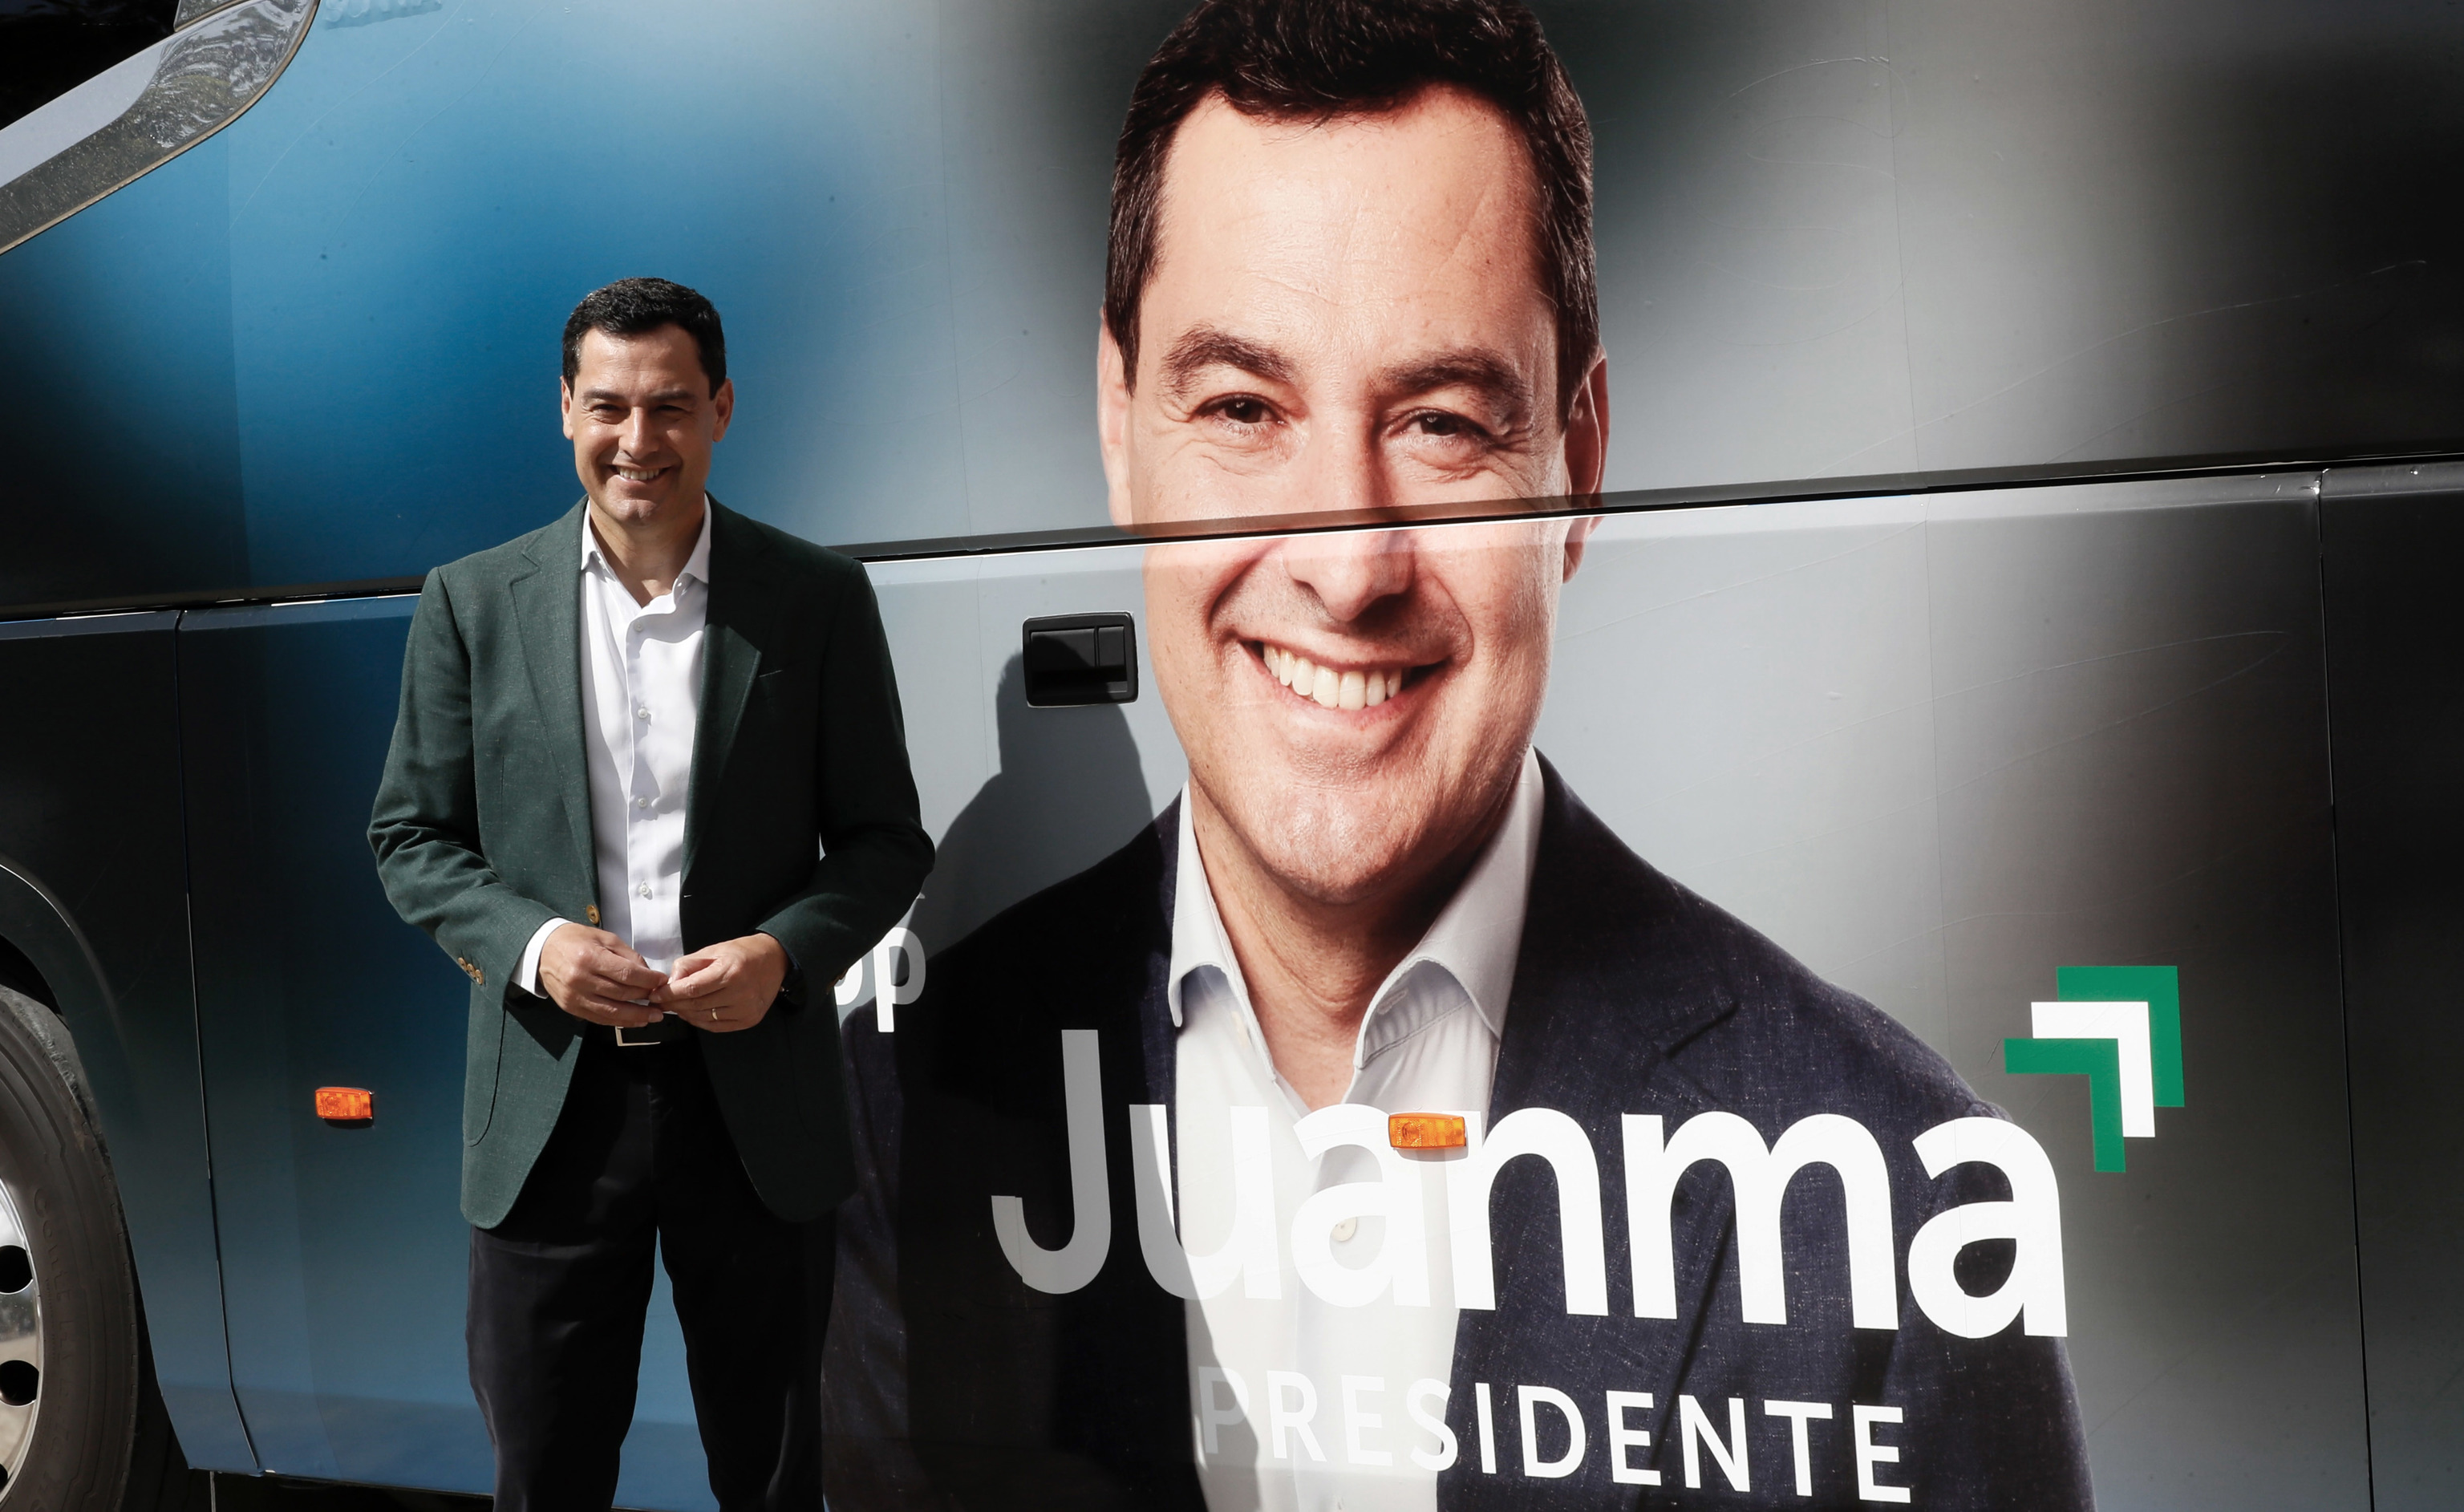 The 'popular' Juanma Moreno next to a car from his campaign